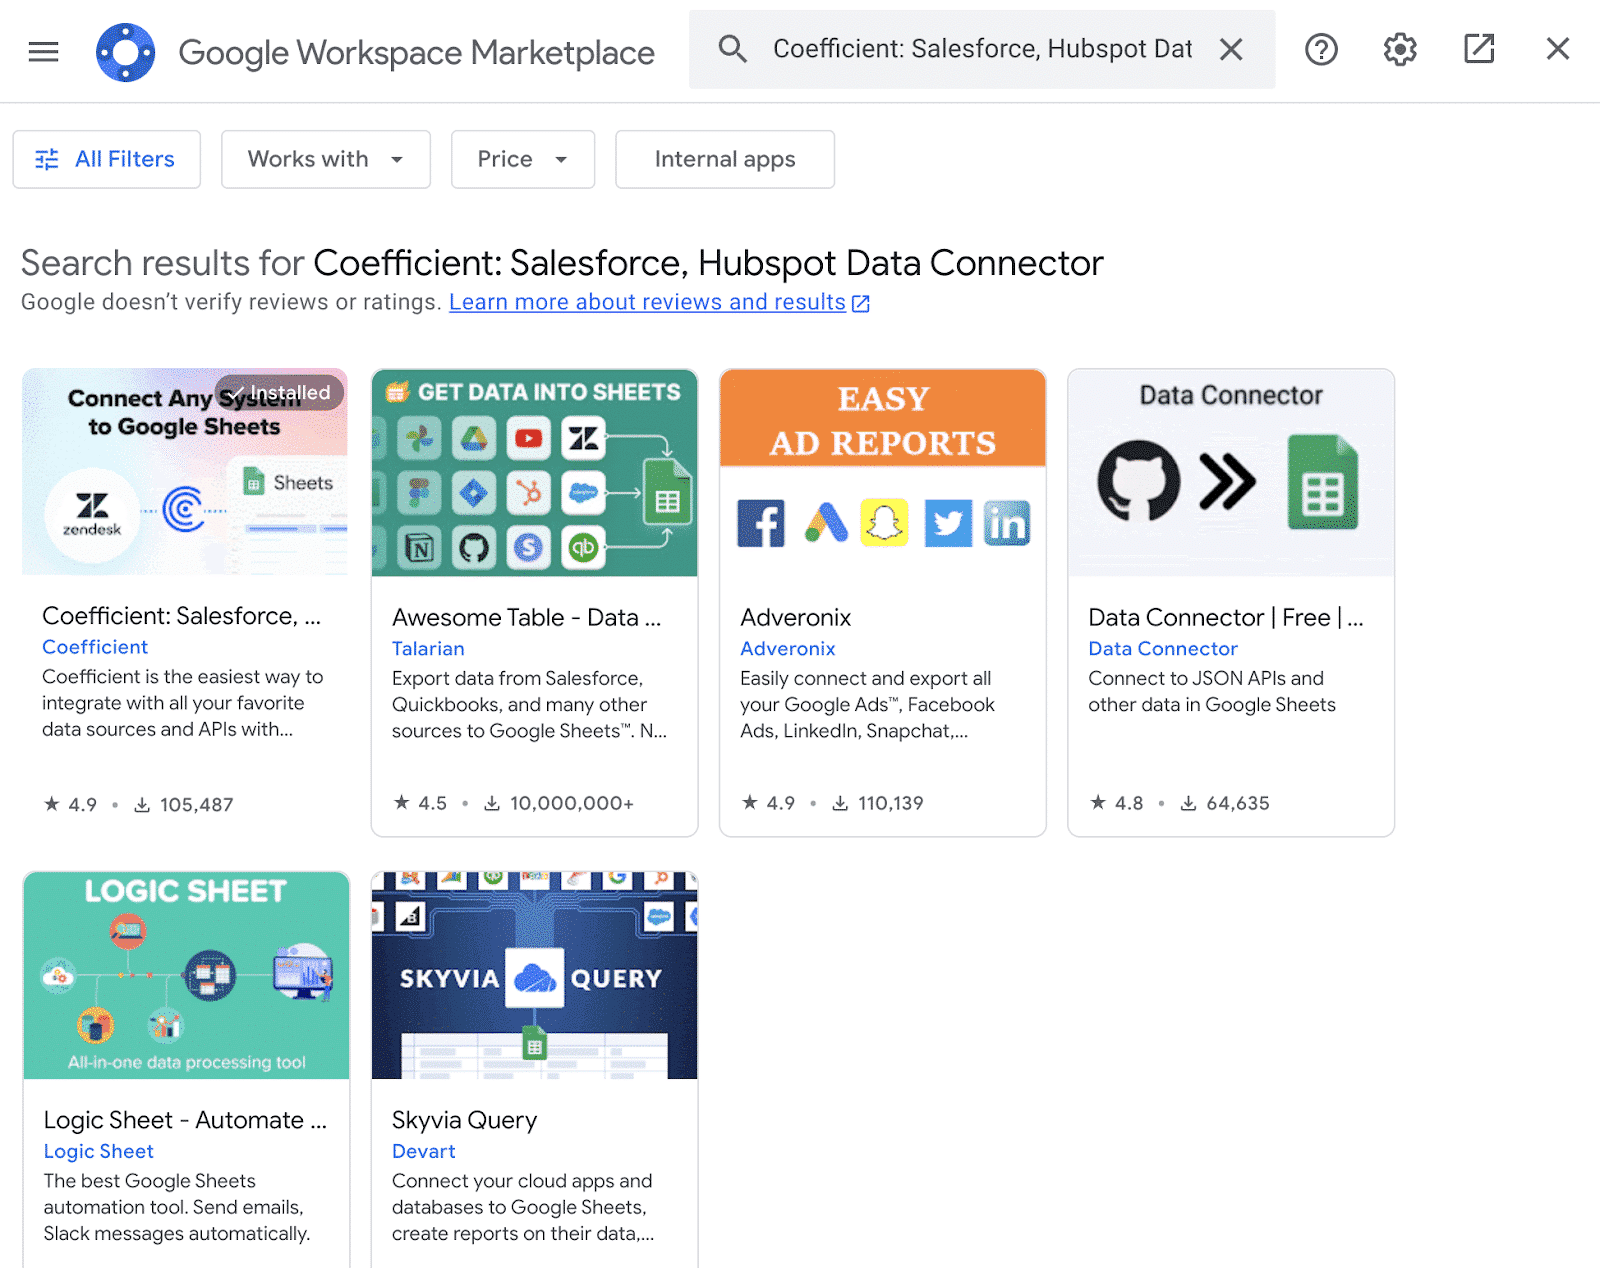 The Google Workspace Marketplace with Coefficient searched and the first result highlighted.